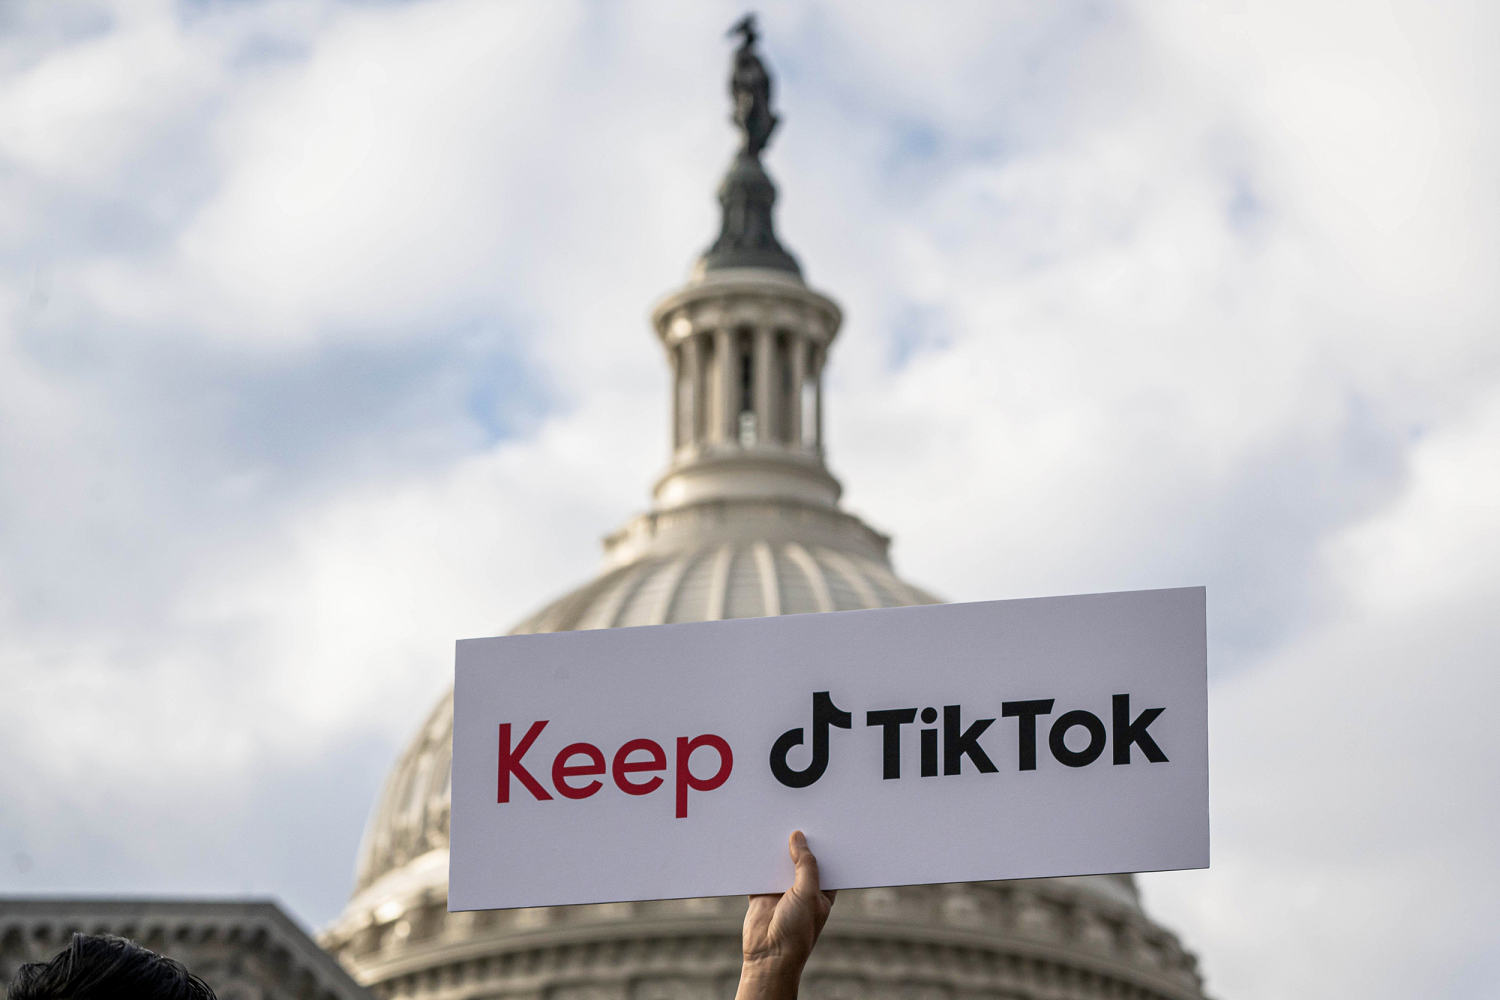 Congress approved a TikTok ban. Why it could still be years before it takes effect.